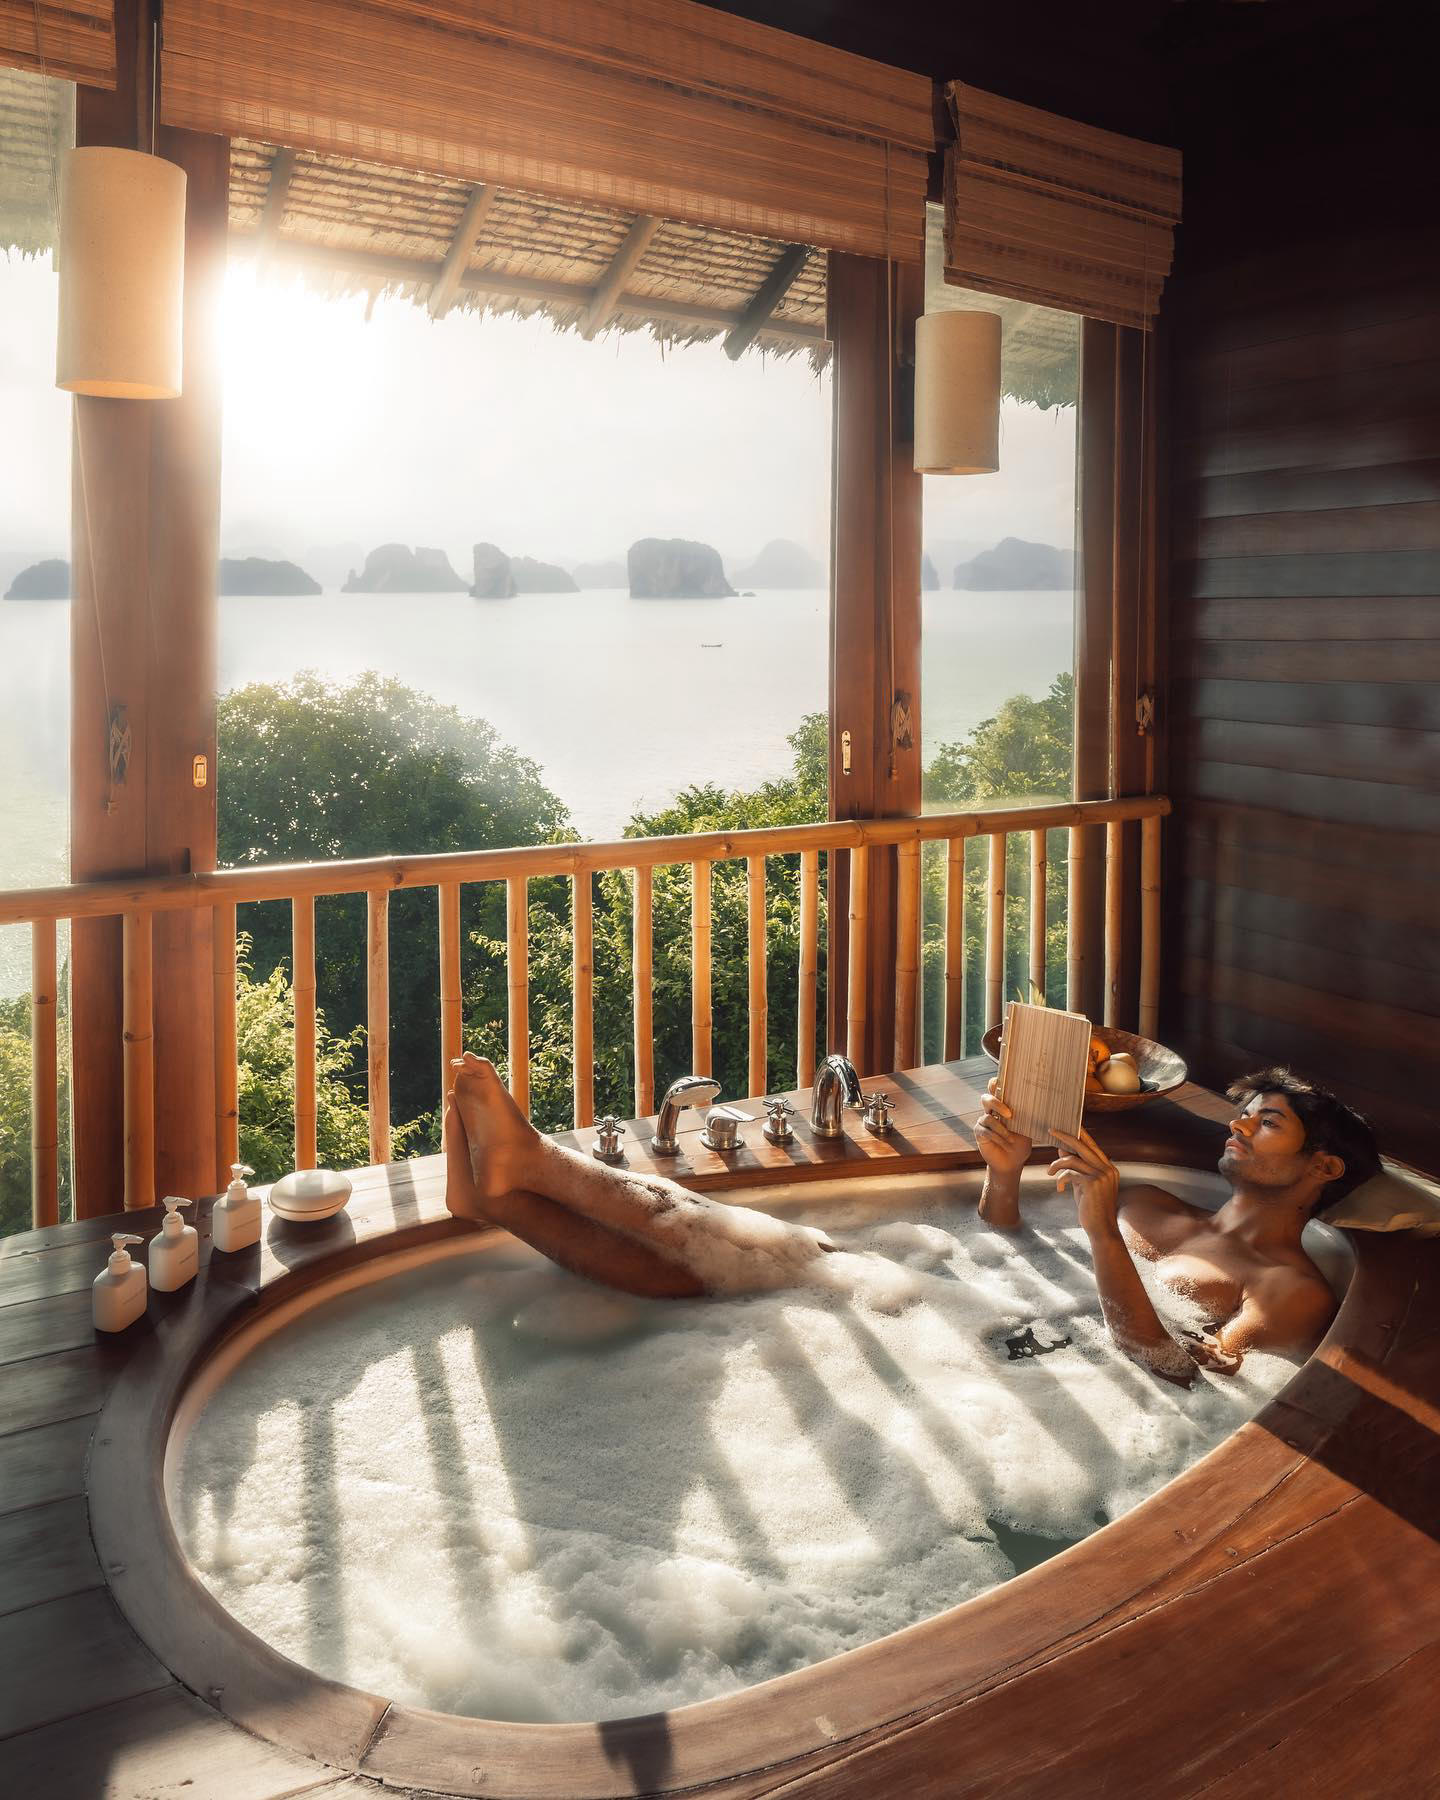 image  1 Dr.Ali Alsulaiman - Morning bath with my favourite hotel view in Thailand at #sixsensesyaonoi